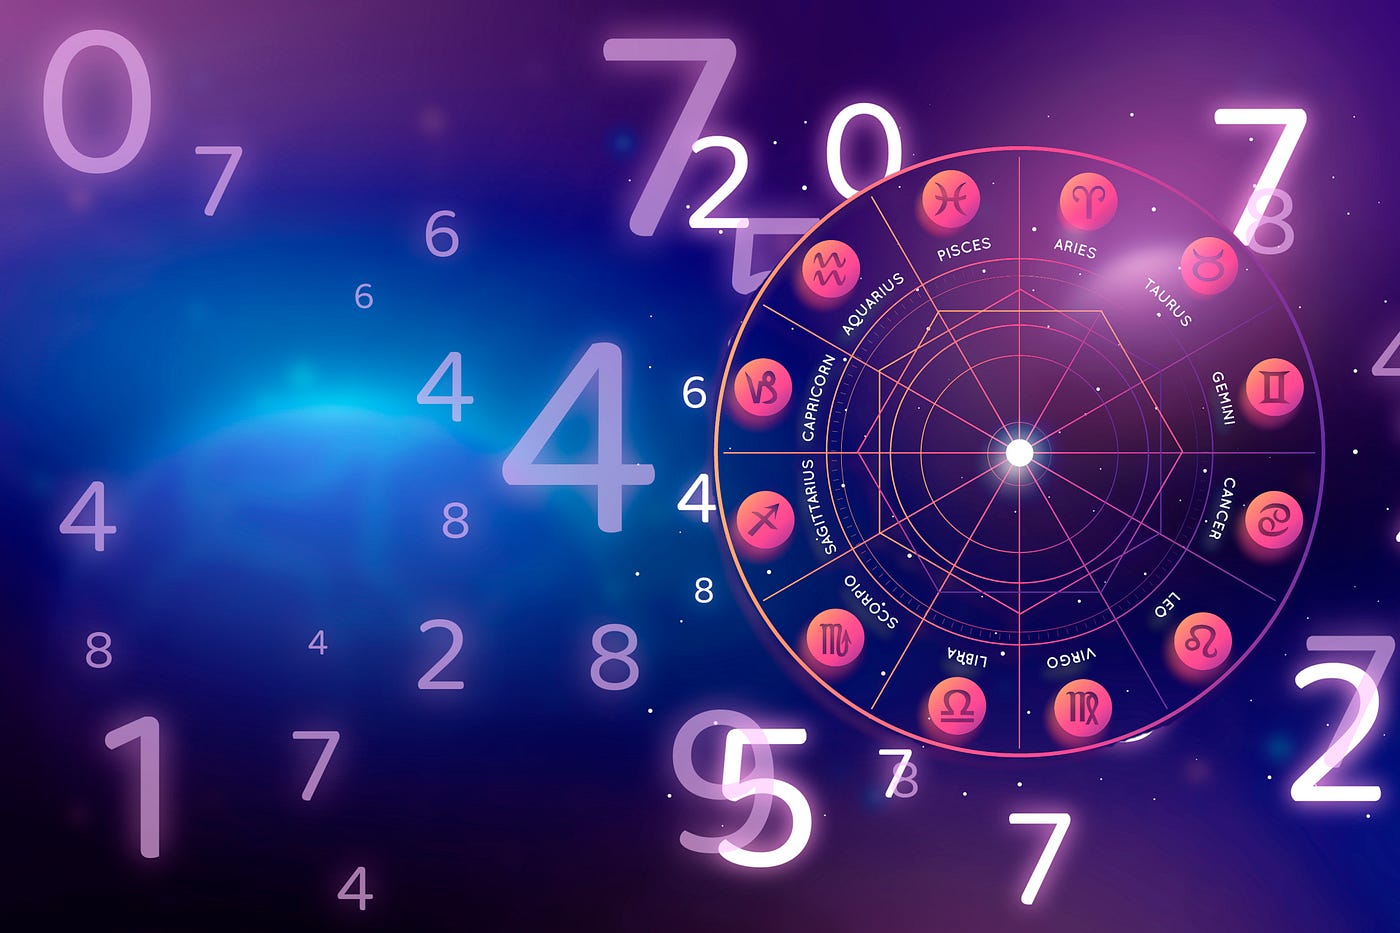 How to Determine Your Numerology Name Number